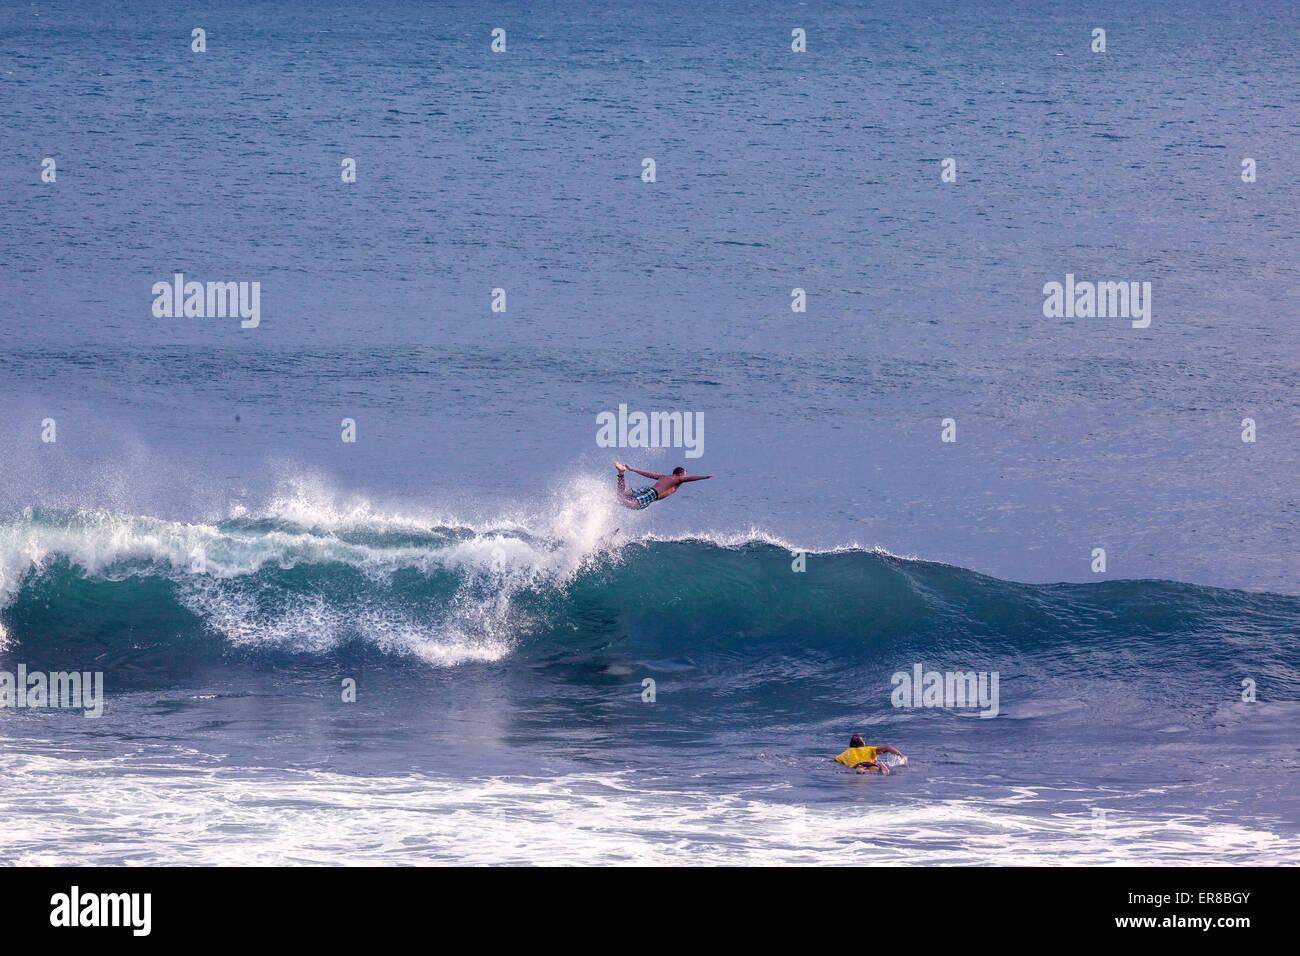 Surfer's wipeout, Bali, Indonesia. Stock Photo